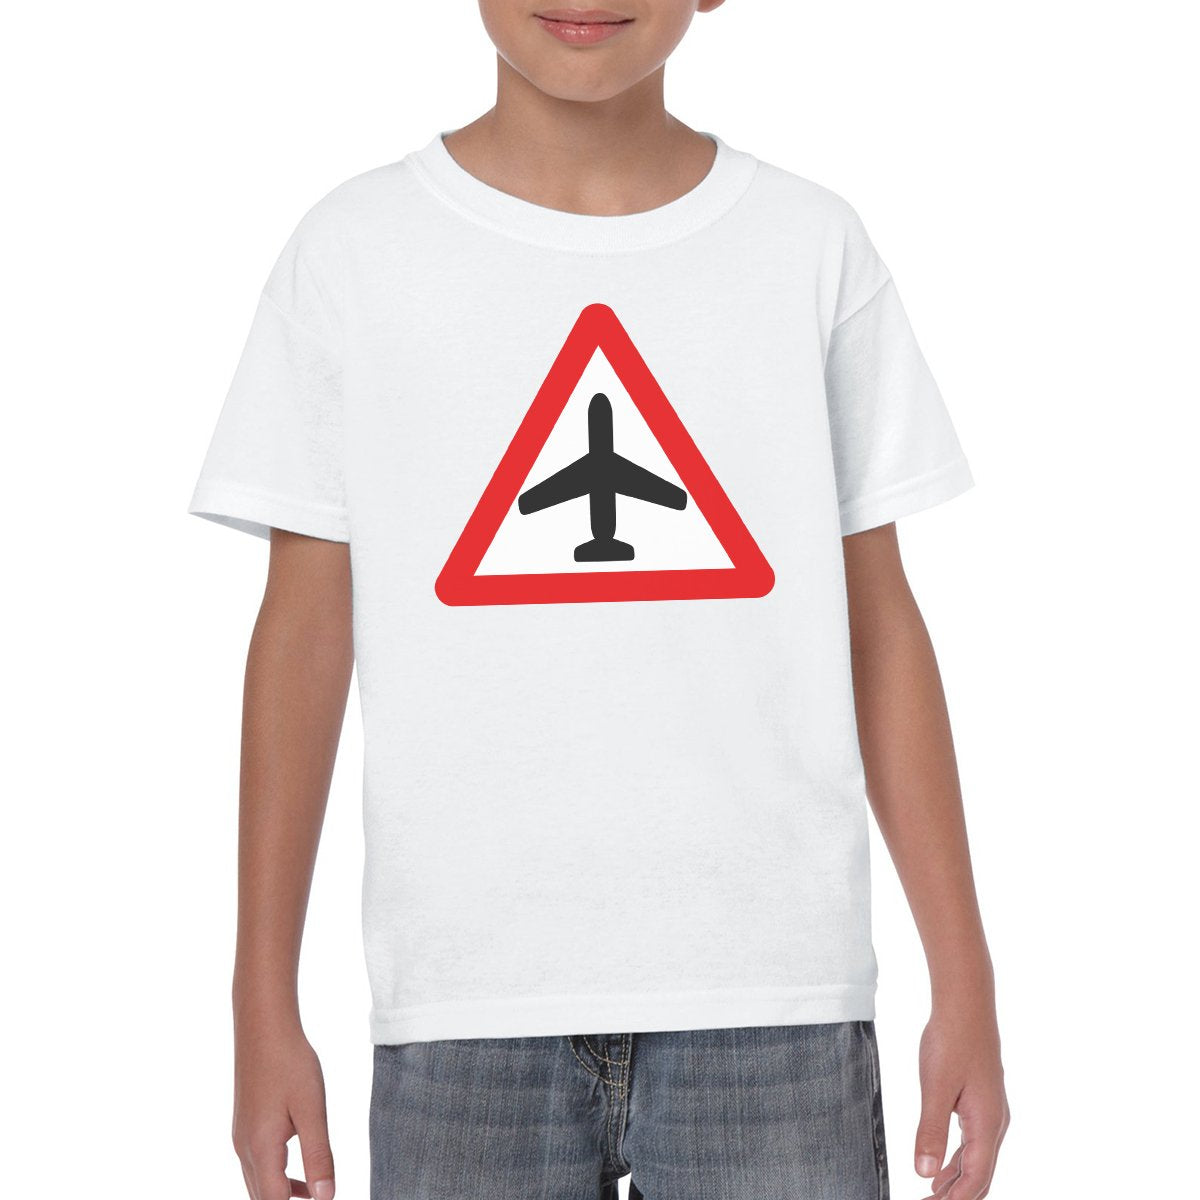 CAUTION AIRCRAFT Youth Semi-Fitted T-Shirt